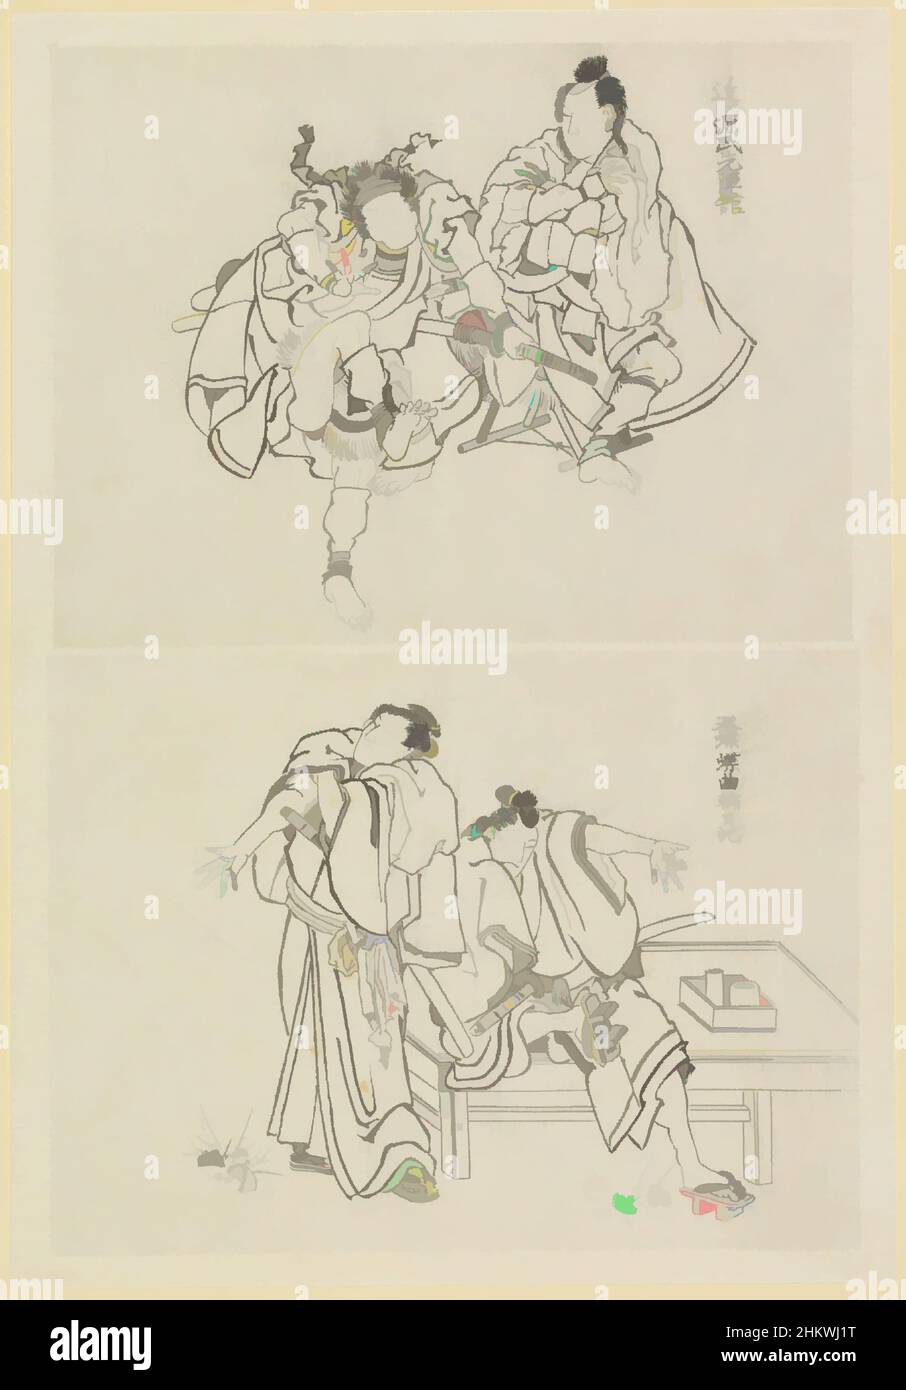 Art inspired by Two stage scenes, one with two samurai and one with two figures at a table, Sheet with two taped drawings showing stage scenes: one with two samurai and one with two figures at a low table. An inscription gives the names of the plays., draughtsman: Katsushika Hokusai, Classic works modernized by Artotop with a splash of modernity. Shapes, color and value, eye-catching visual impact on art. Emotions through freedom of artworks in a contemporary way. A timeless message pursuing a wildly creative new direction. Artists turning to the digital medium and creating the Artotop NFT Stock Photo